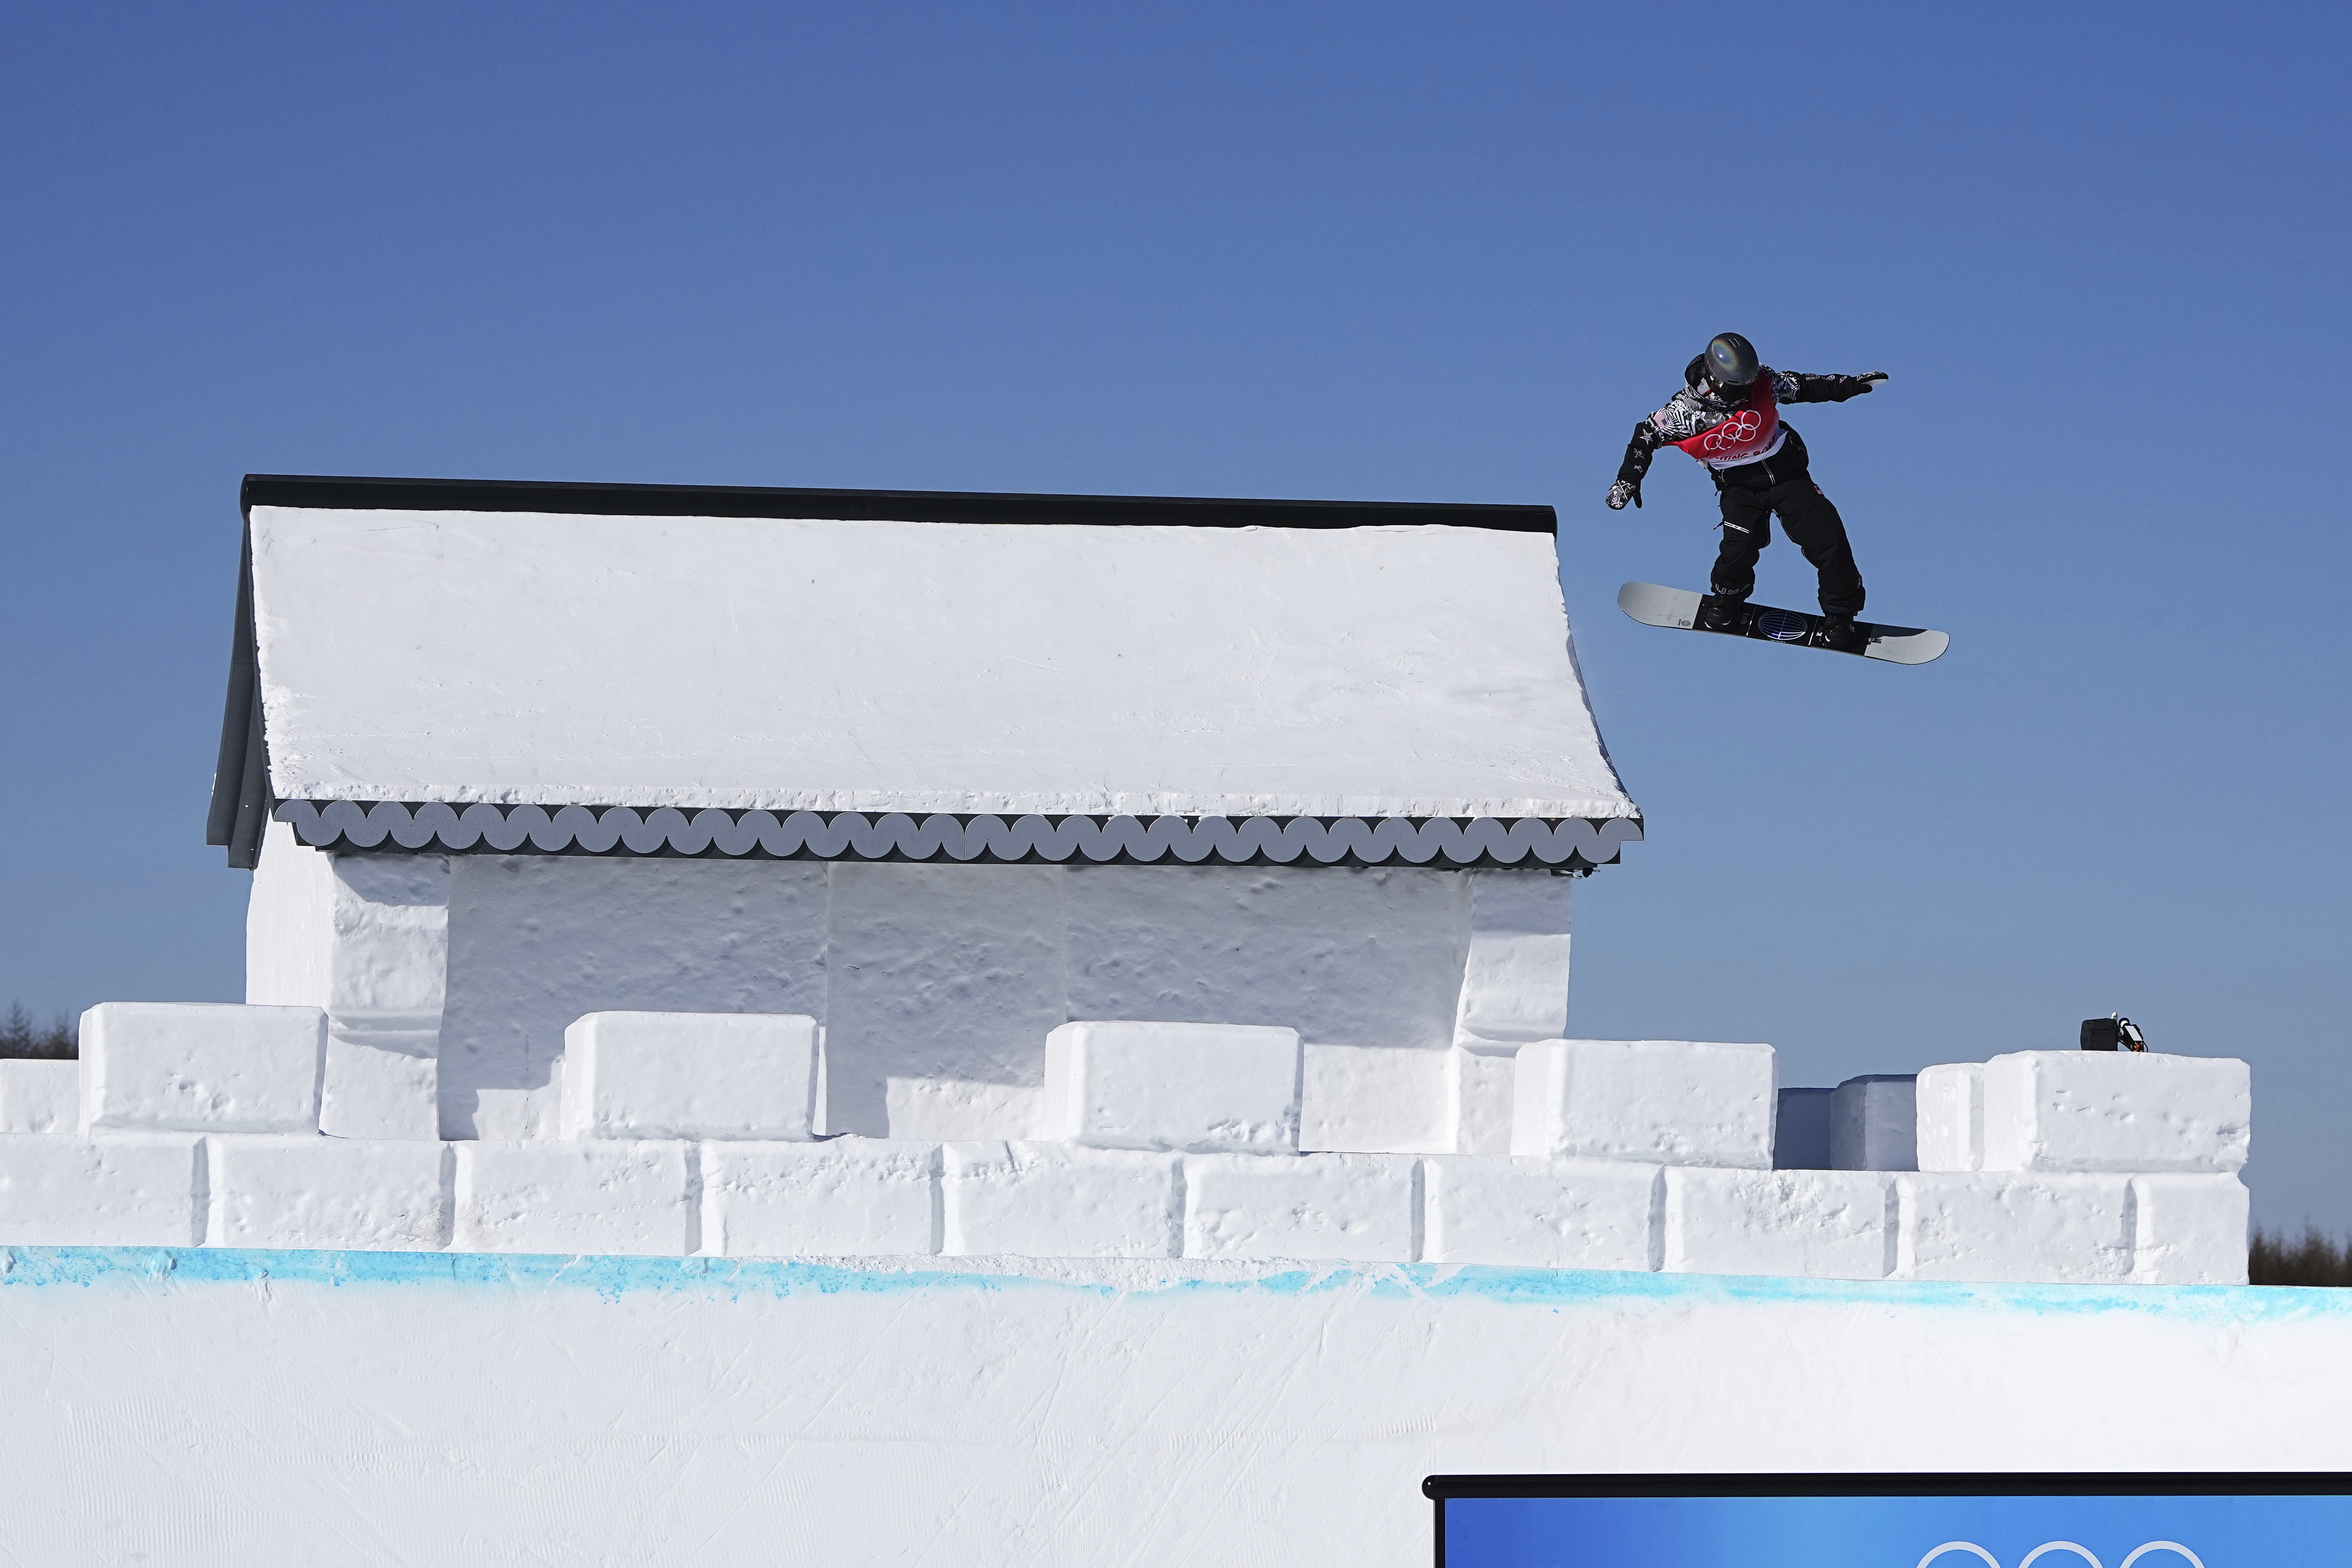 Mens snowboarding slopestyle final Live stream, start time, TV, how to watch Red Gerard at 2022 Winter Olympics